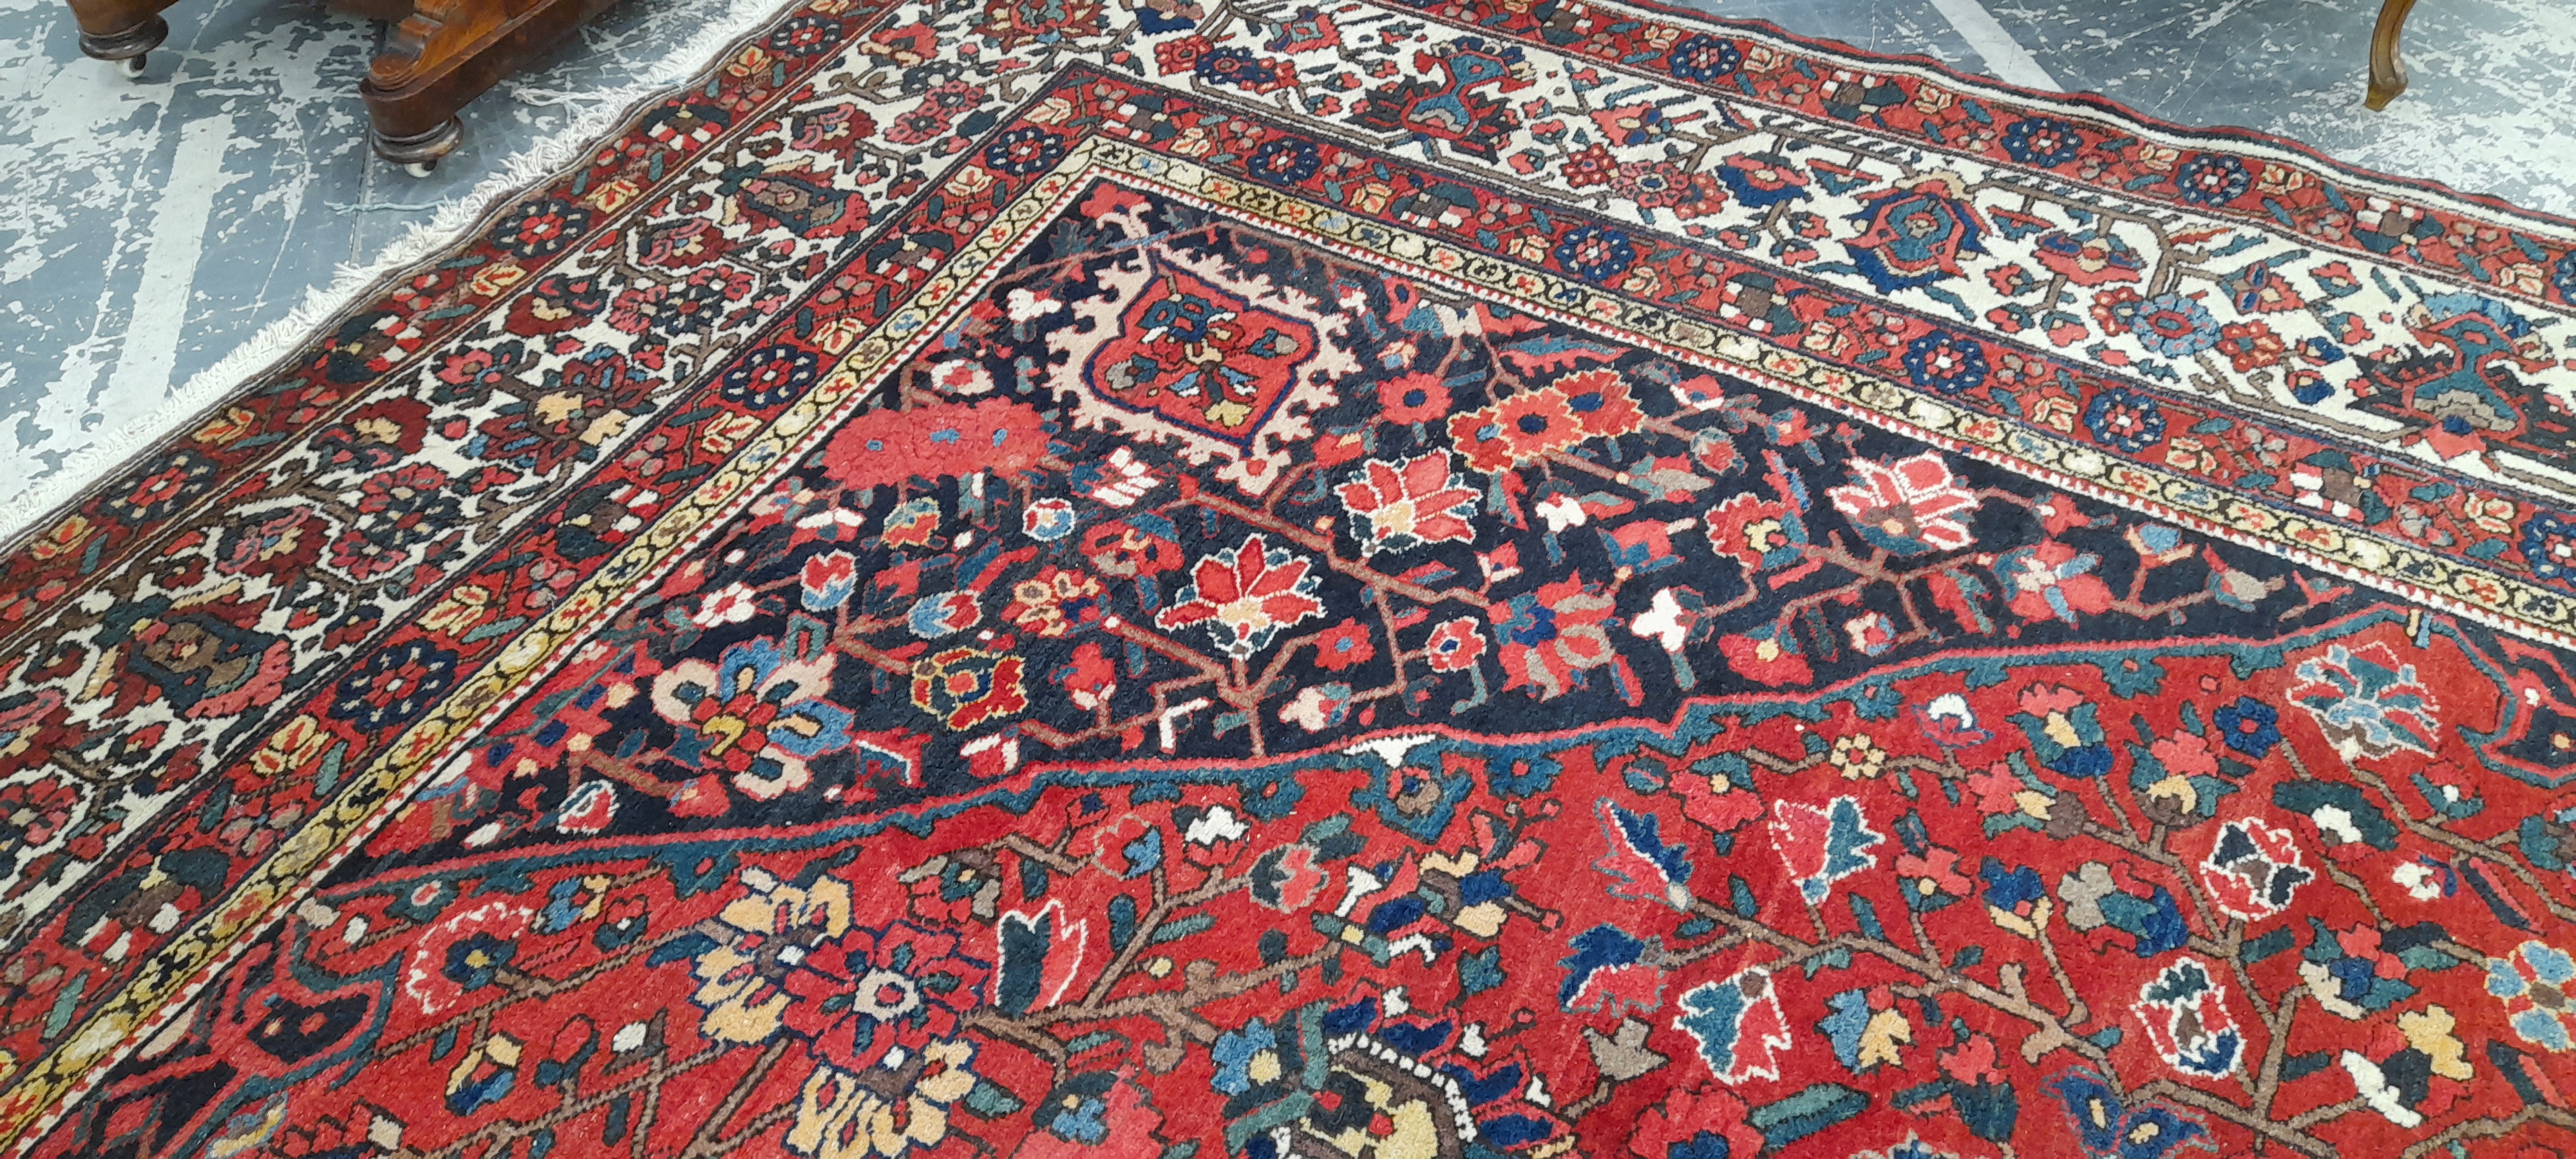 A COUNTRY HOUSE PERSIAN BAHKTIARI CARPET. 560 x 396cms - Image 5 of 8